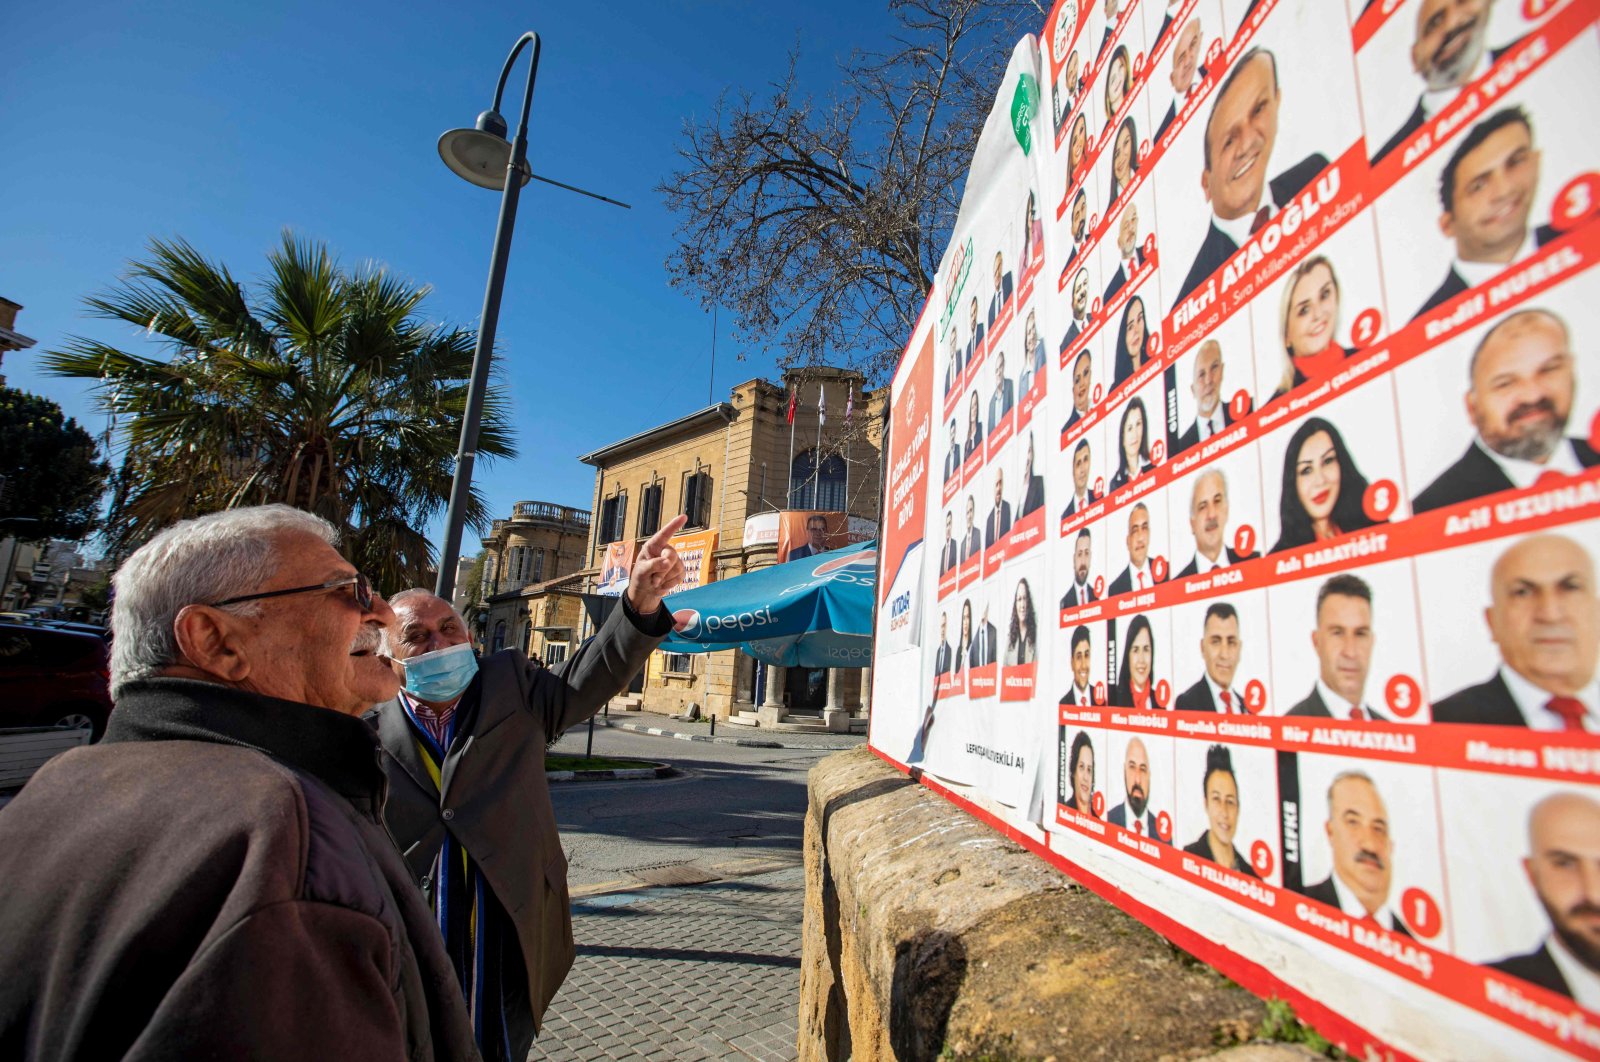 Men look at election posters in the capital Lefkoşa (Nicosia), Turkish Cyprus, Jan. 20, 2022. (AFP Photo)